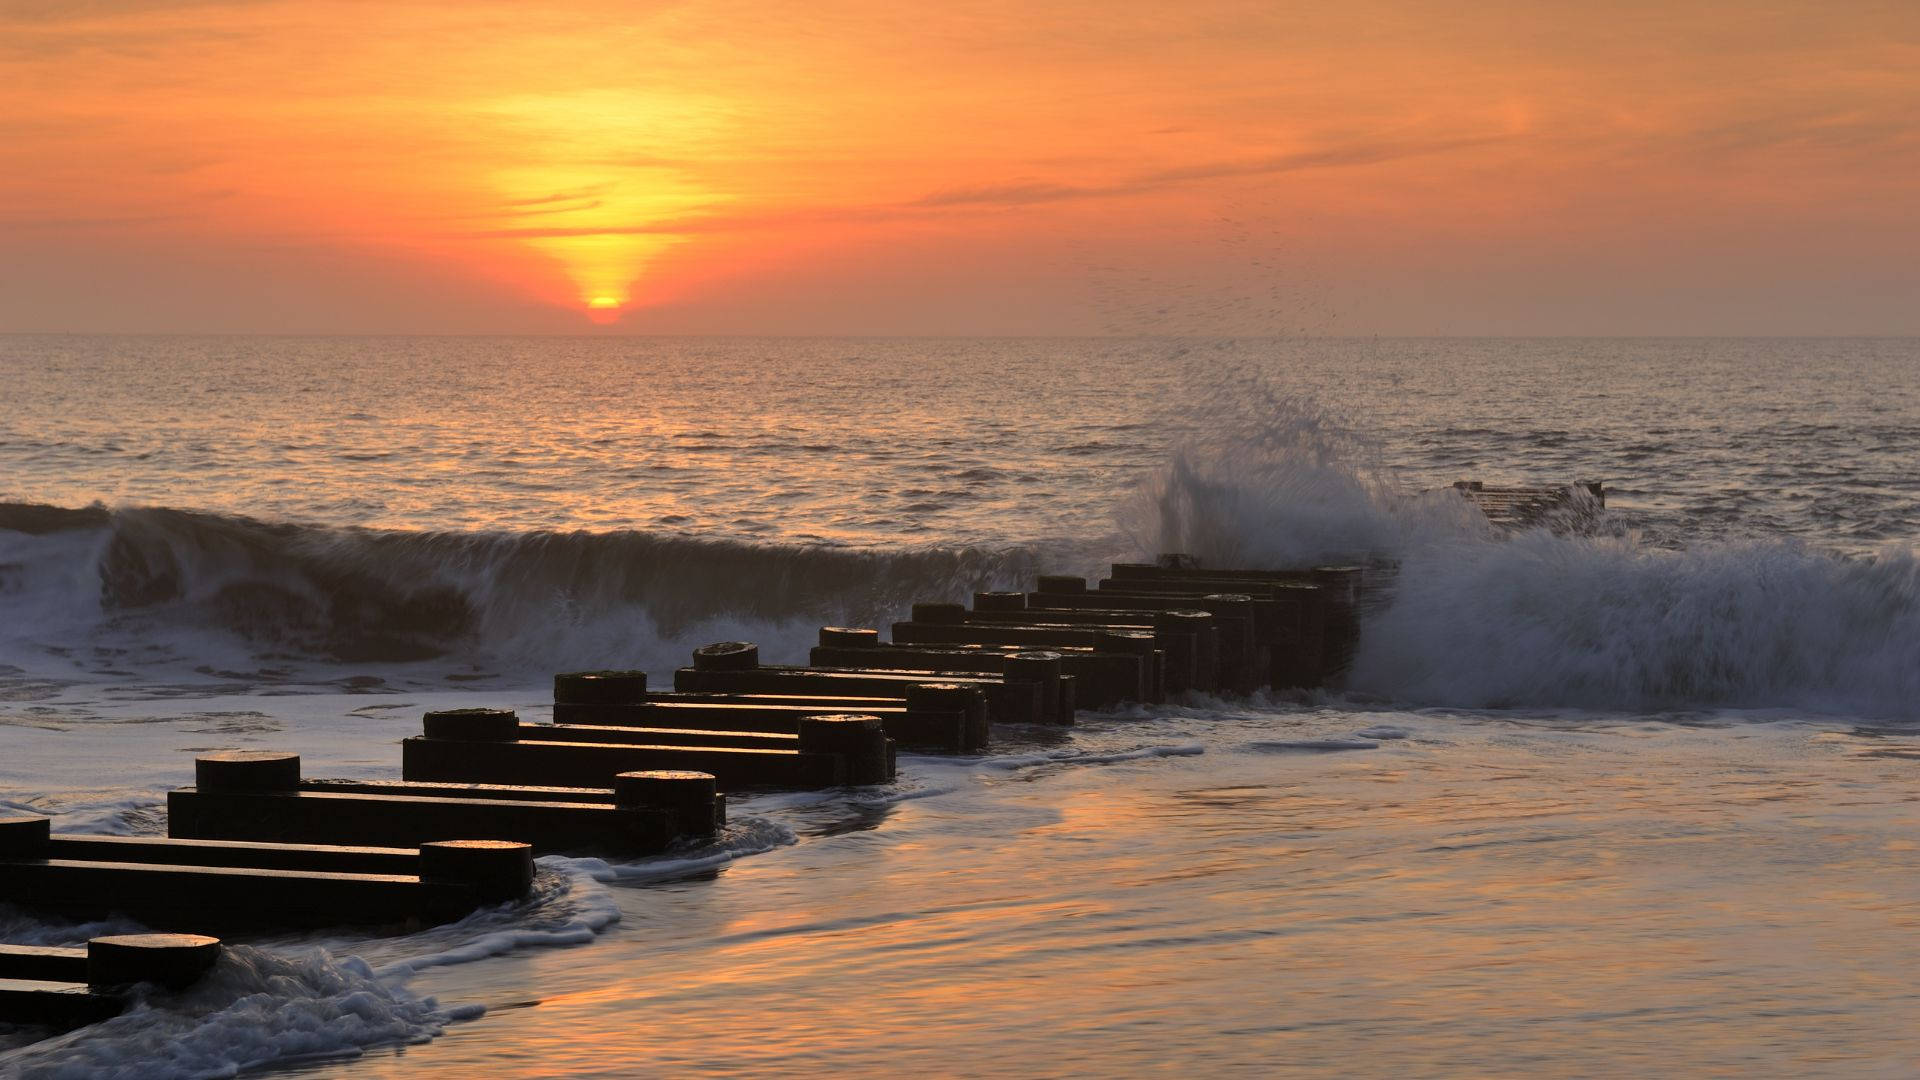 Jetty Pile With Wave On Beach Sunrise Wallpaper